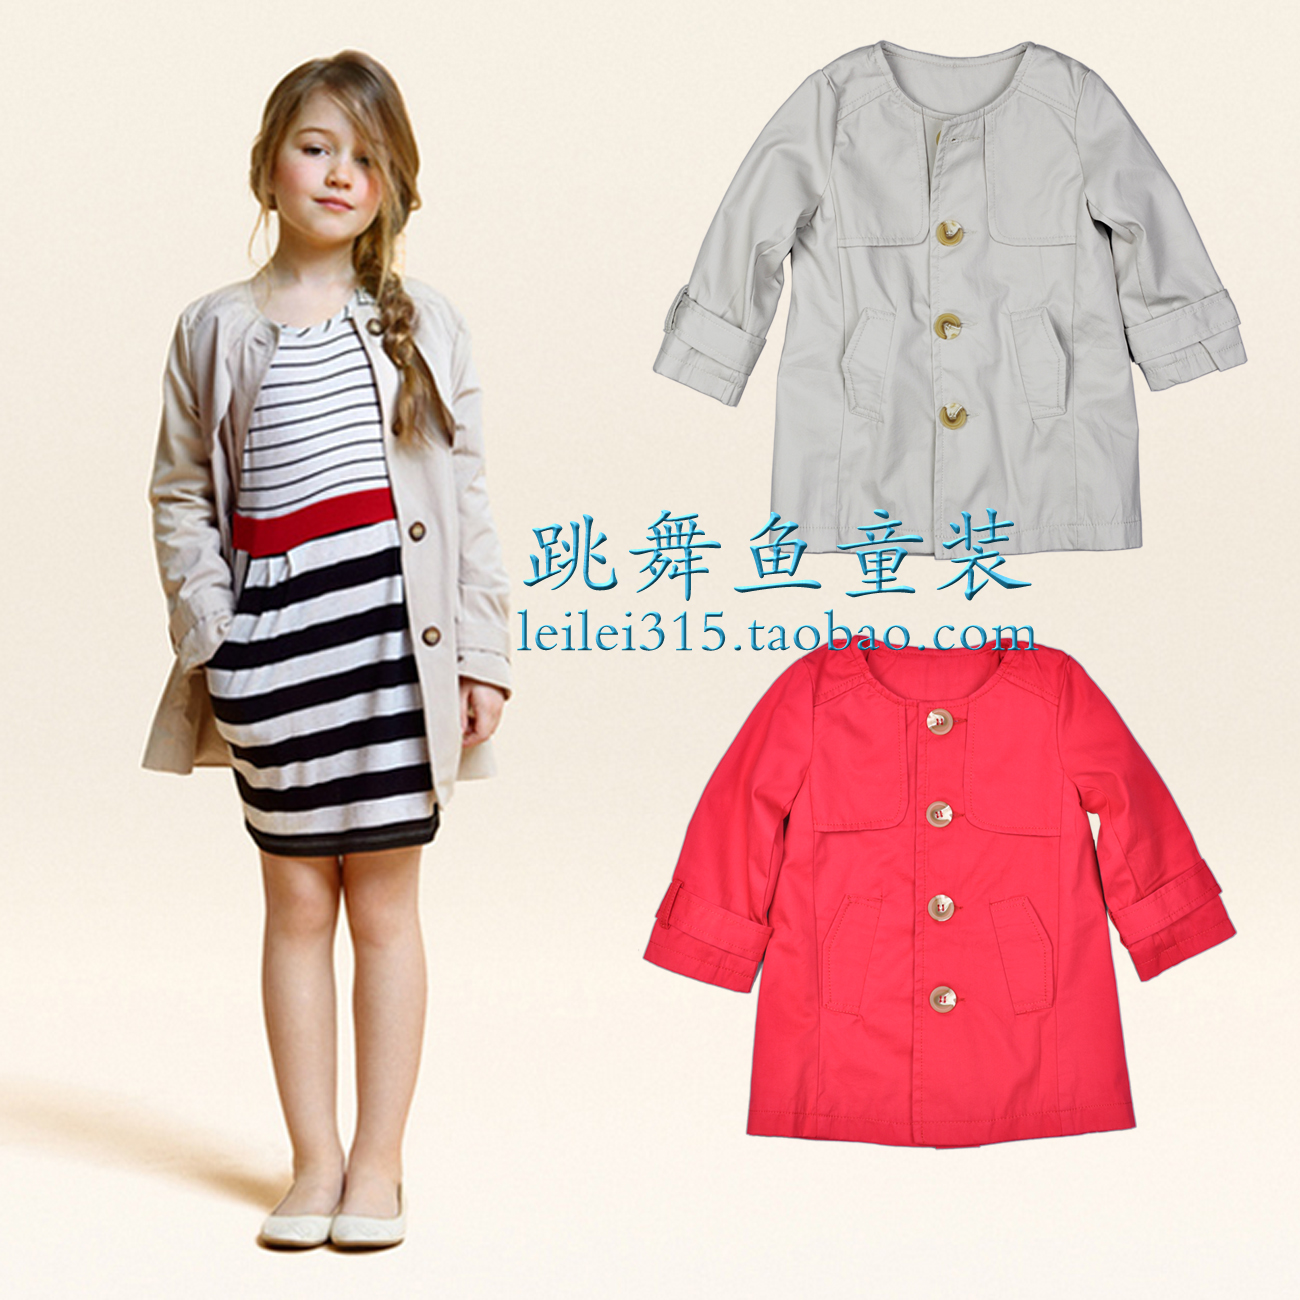 Children's clothing female child autumn and winter o-neck beautiful trench outerwear 2 - 8